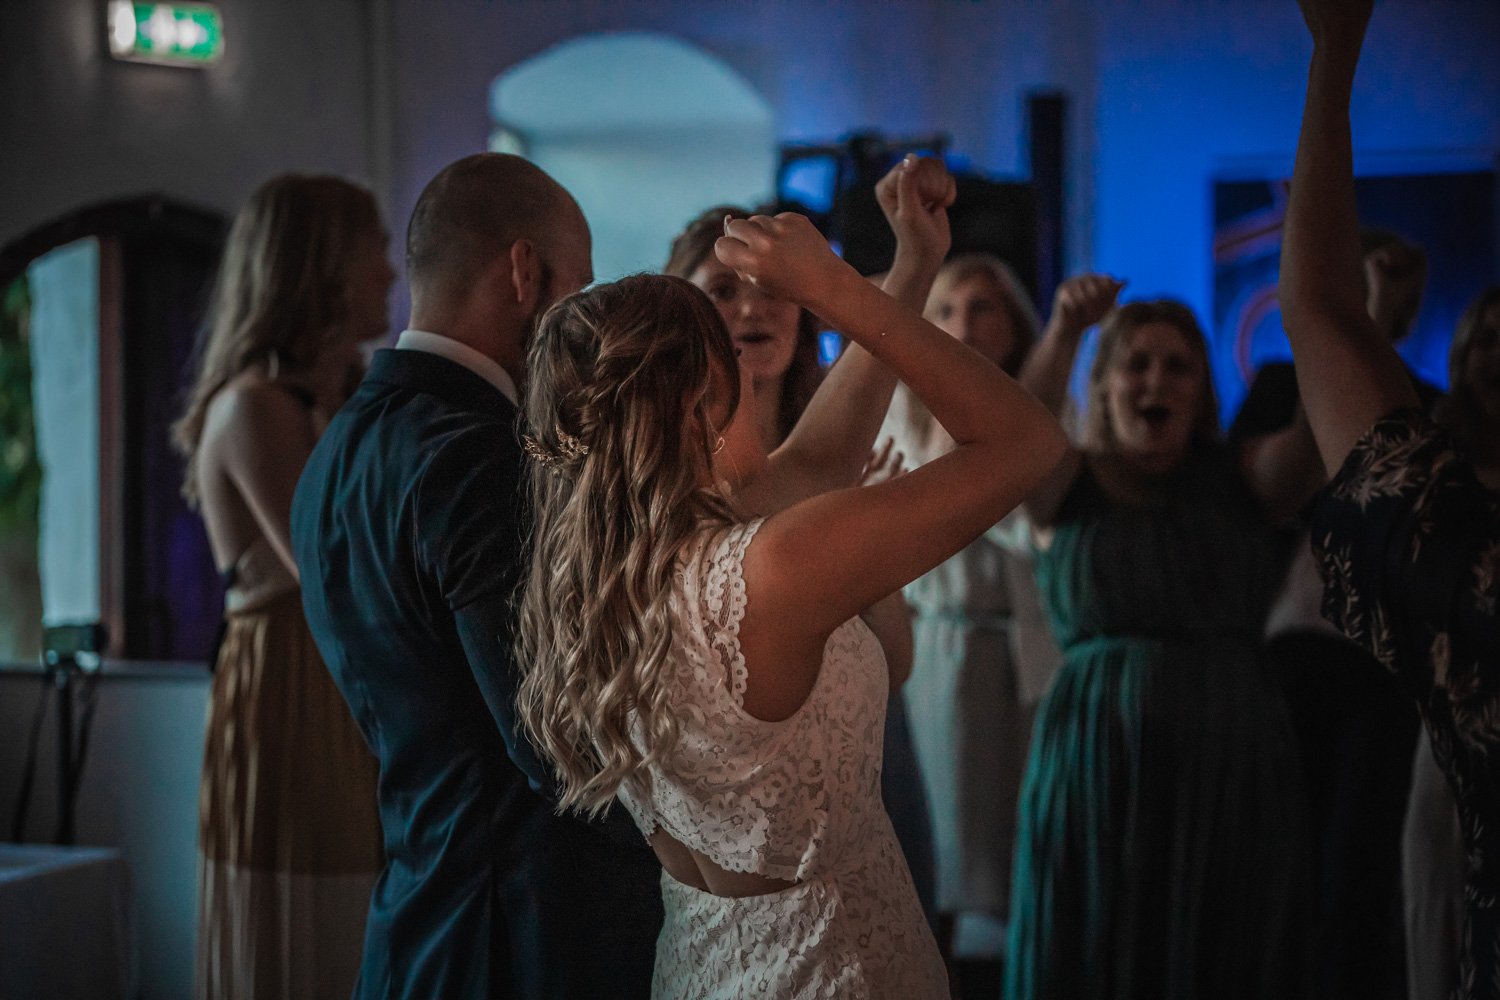  After dinner and wedding cake can the bar open and dancing start   Photo: Fredrik Mårtensson 